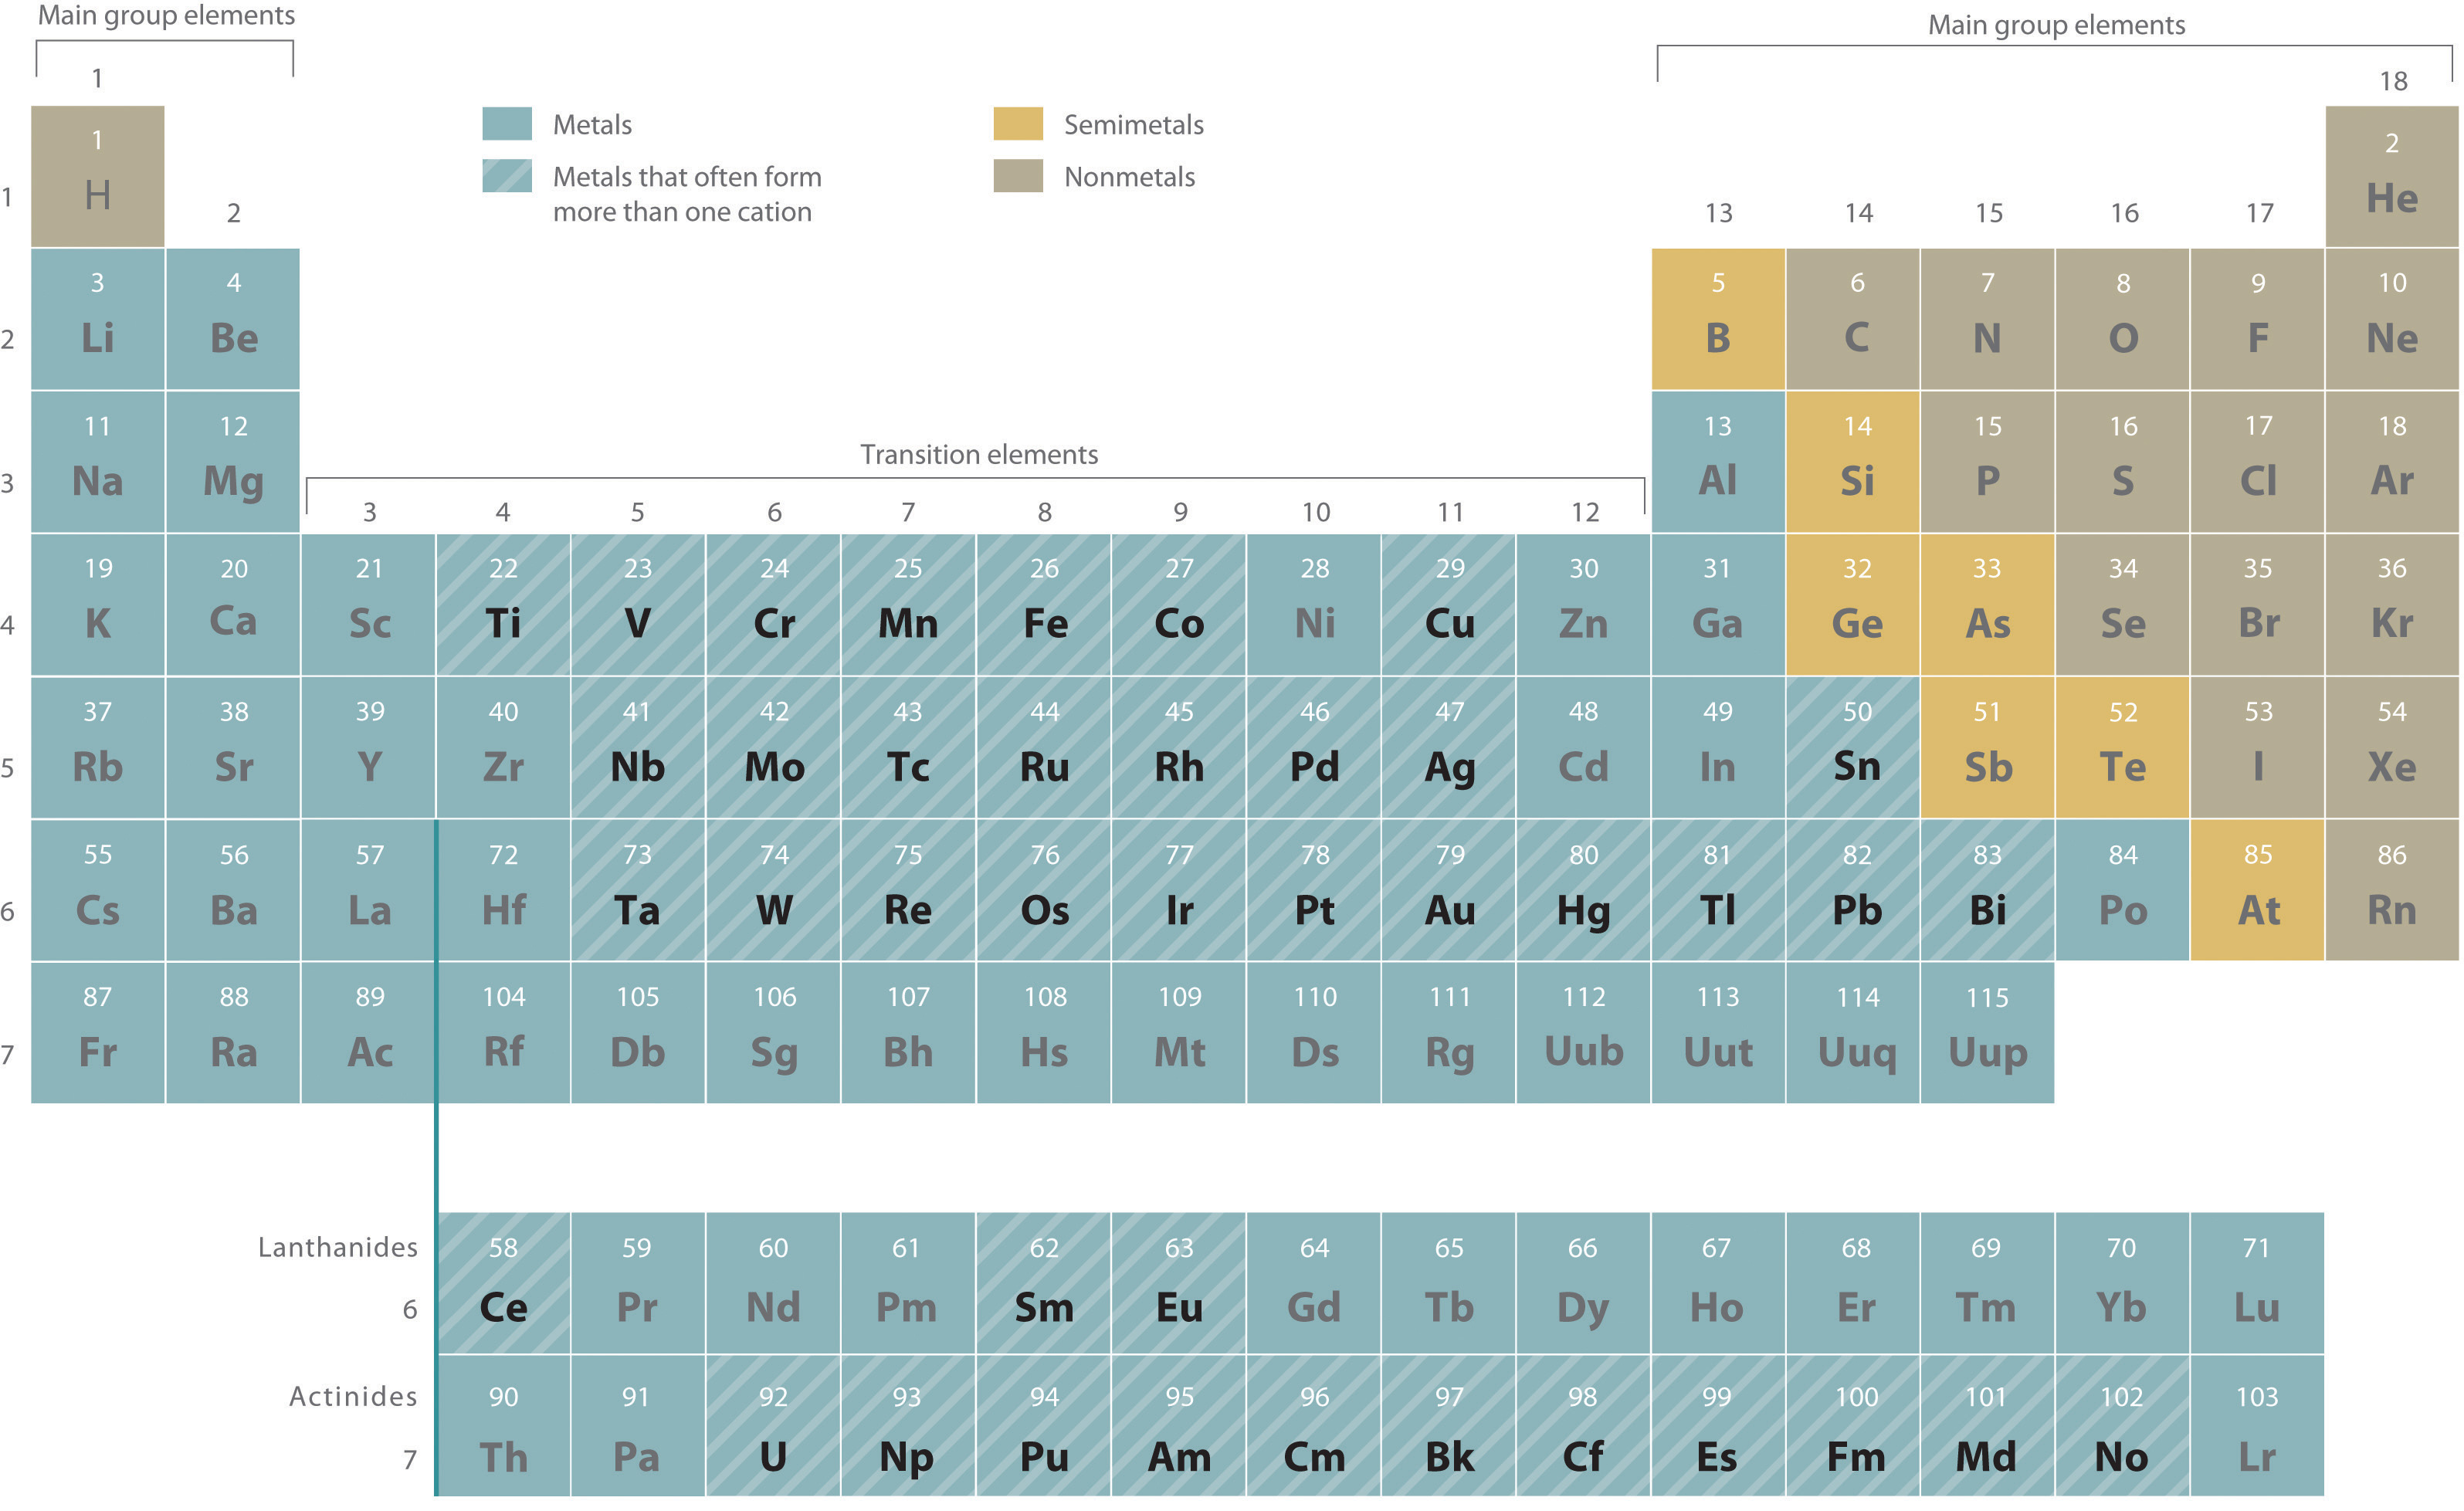 Periodic table labeled to show what  elements are metals, semimetals, nonmetals, and metals that often form more than one cation.